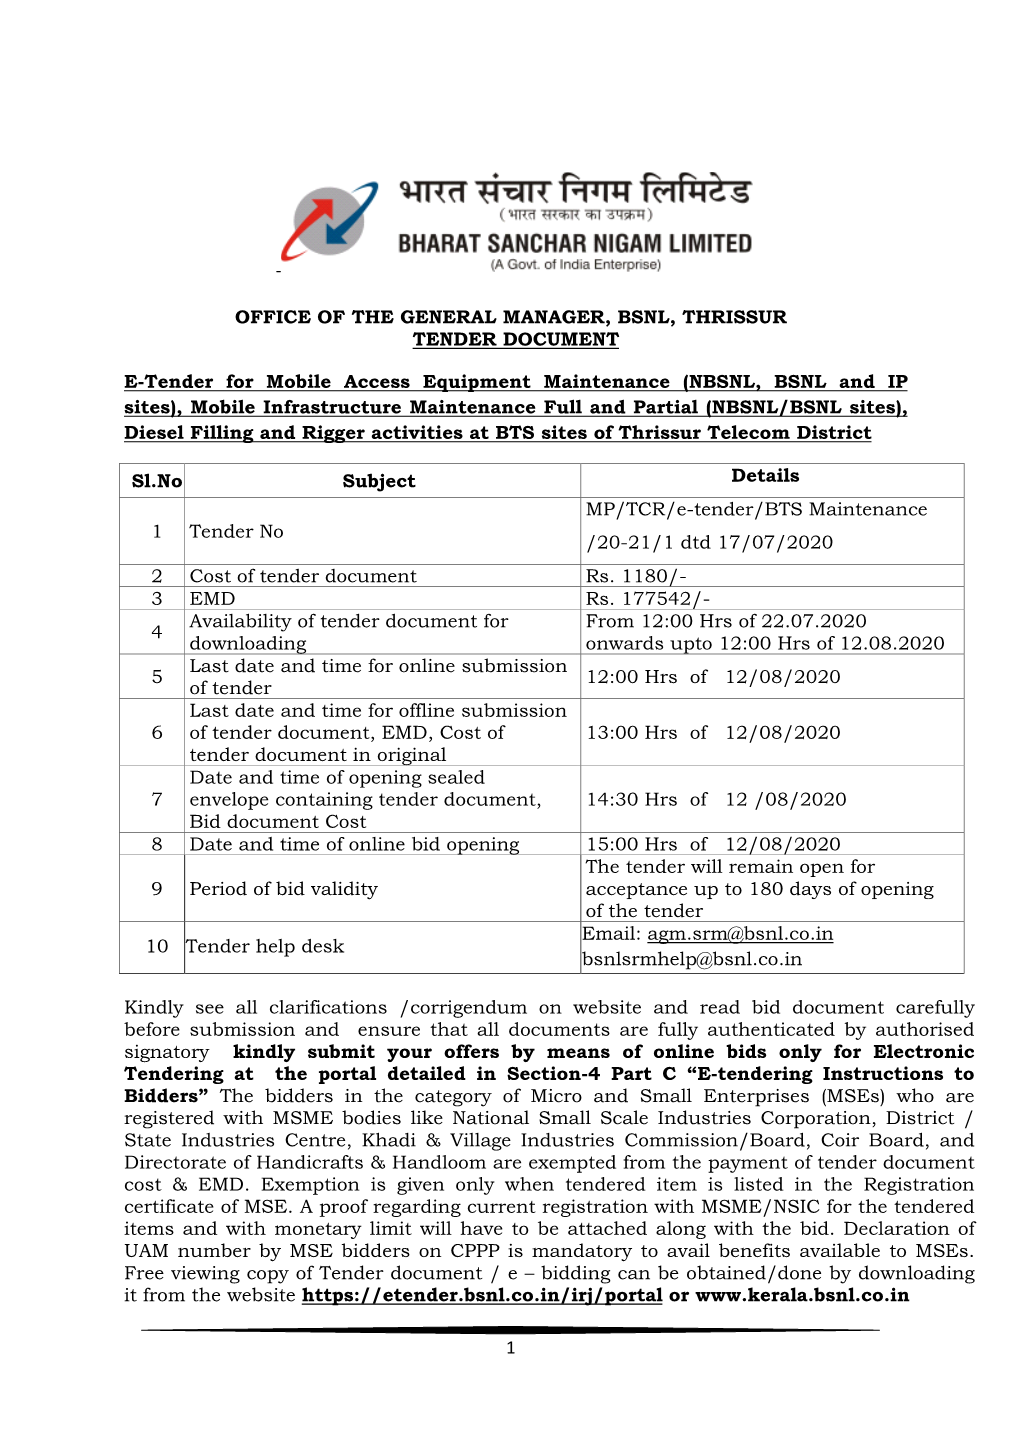 1 Tender No /20-21/1 Dtd 17/07/2020 2 Cost of Tender Document Rs